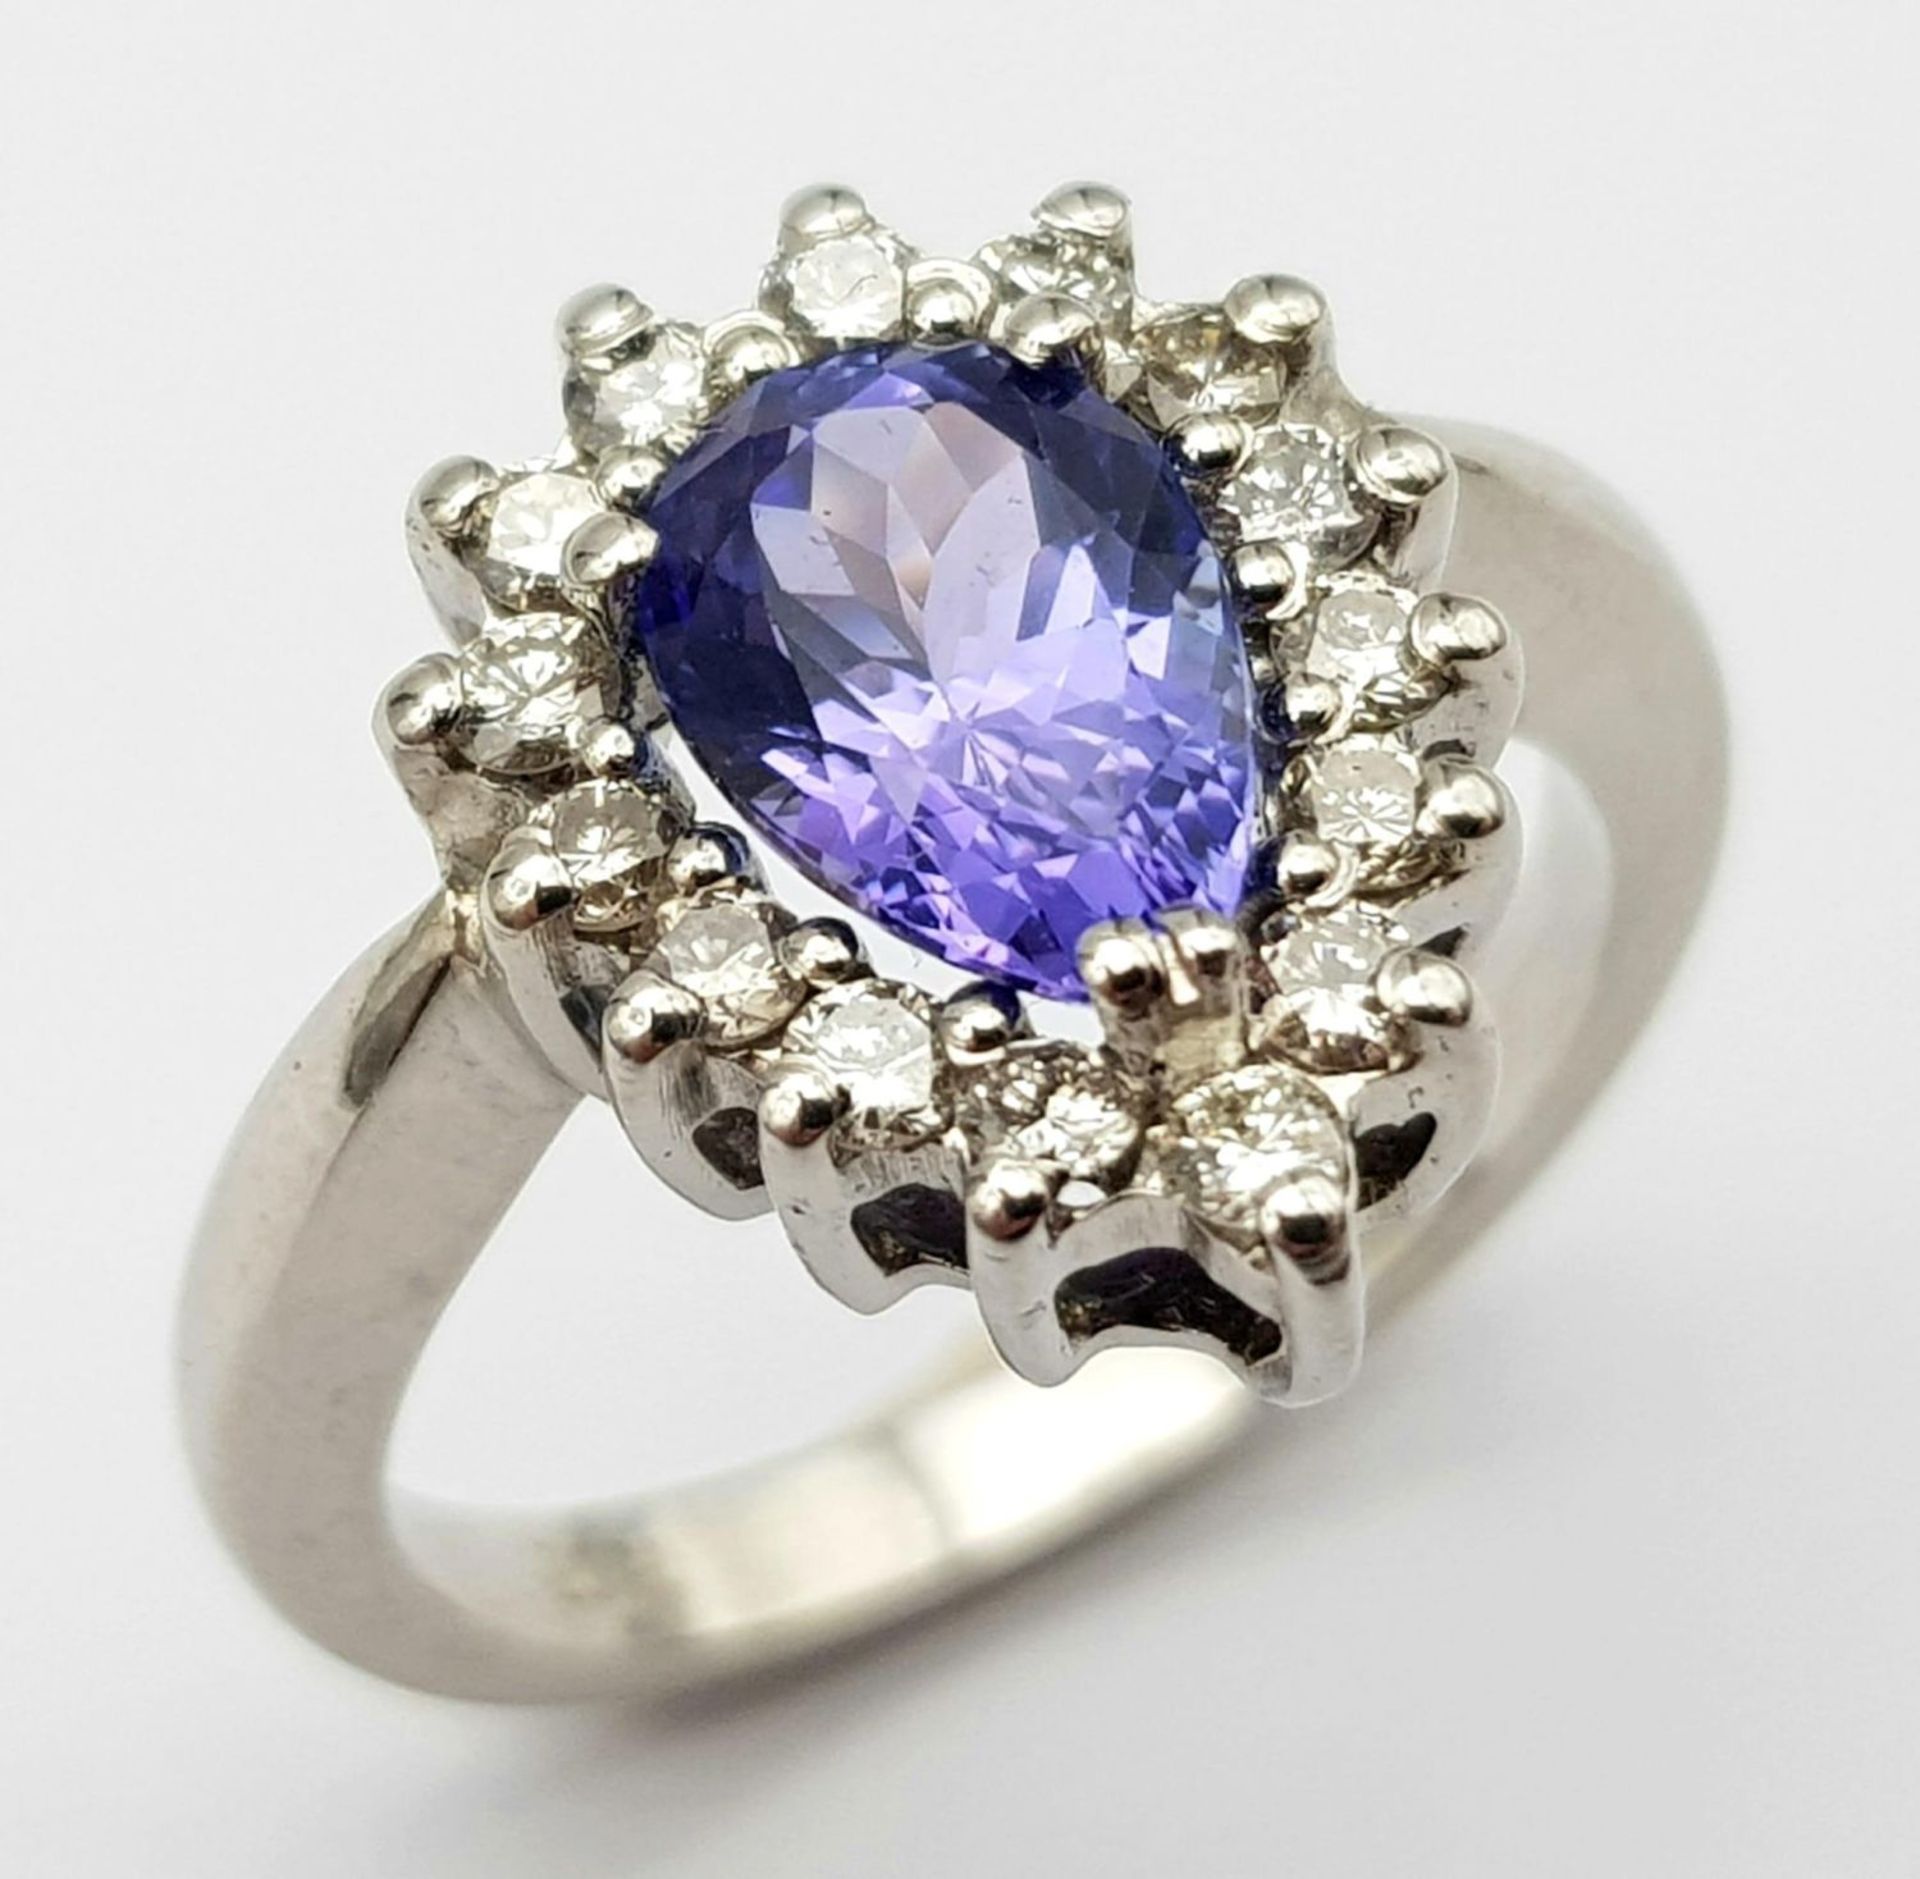 An 18 K white gold ring with a pear cut tanzanite (1.71 carats) surrounded by a halo of diamonds, - Image 3 of 12